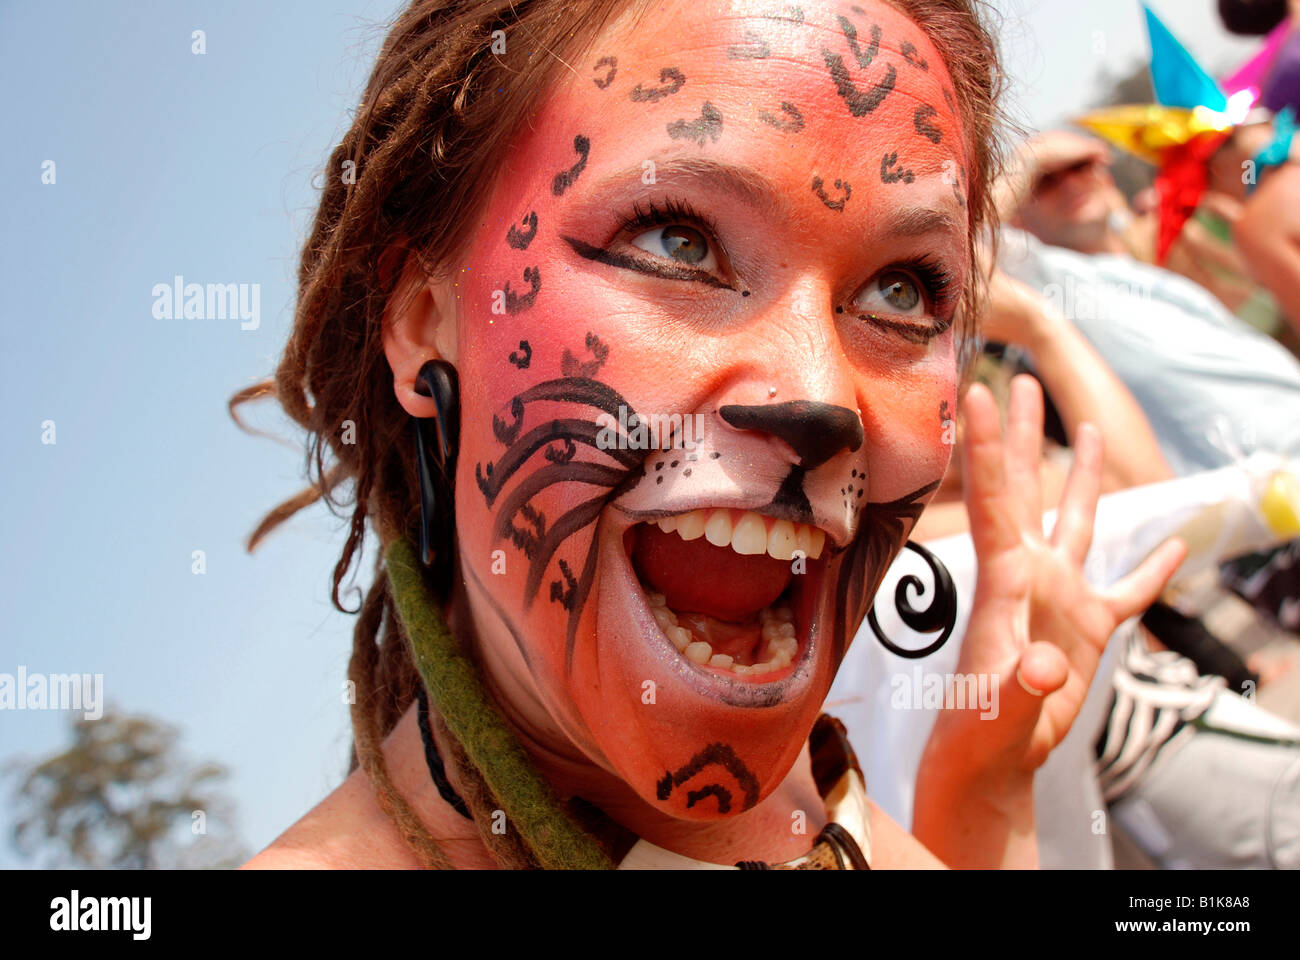 A young woman wearing cat-like makeup posing as a cat, portrait Stock Photo